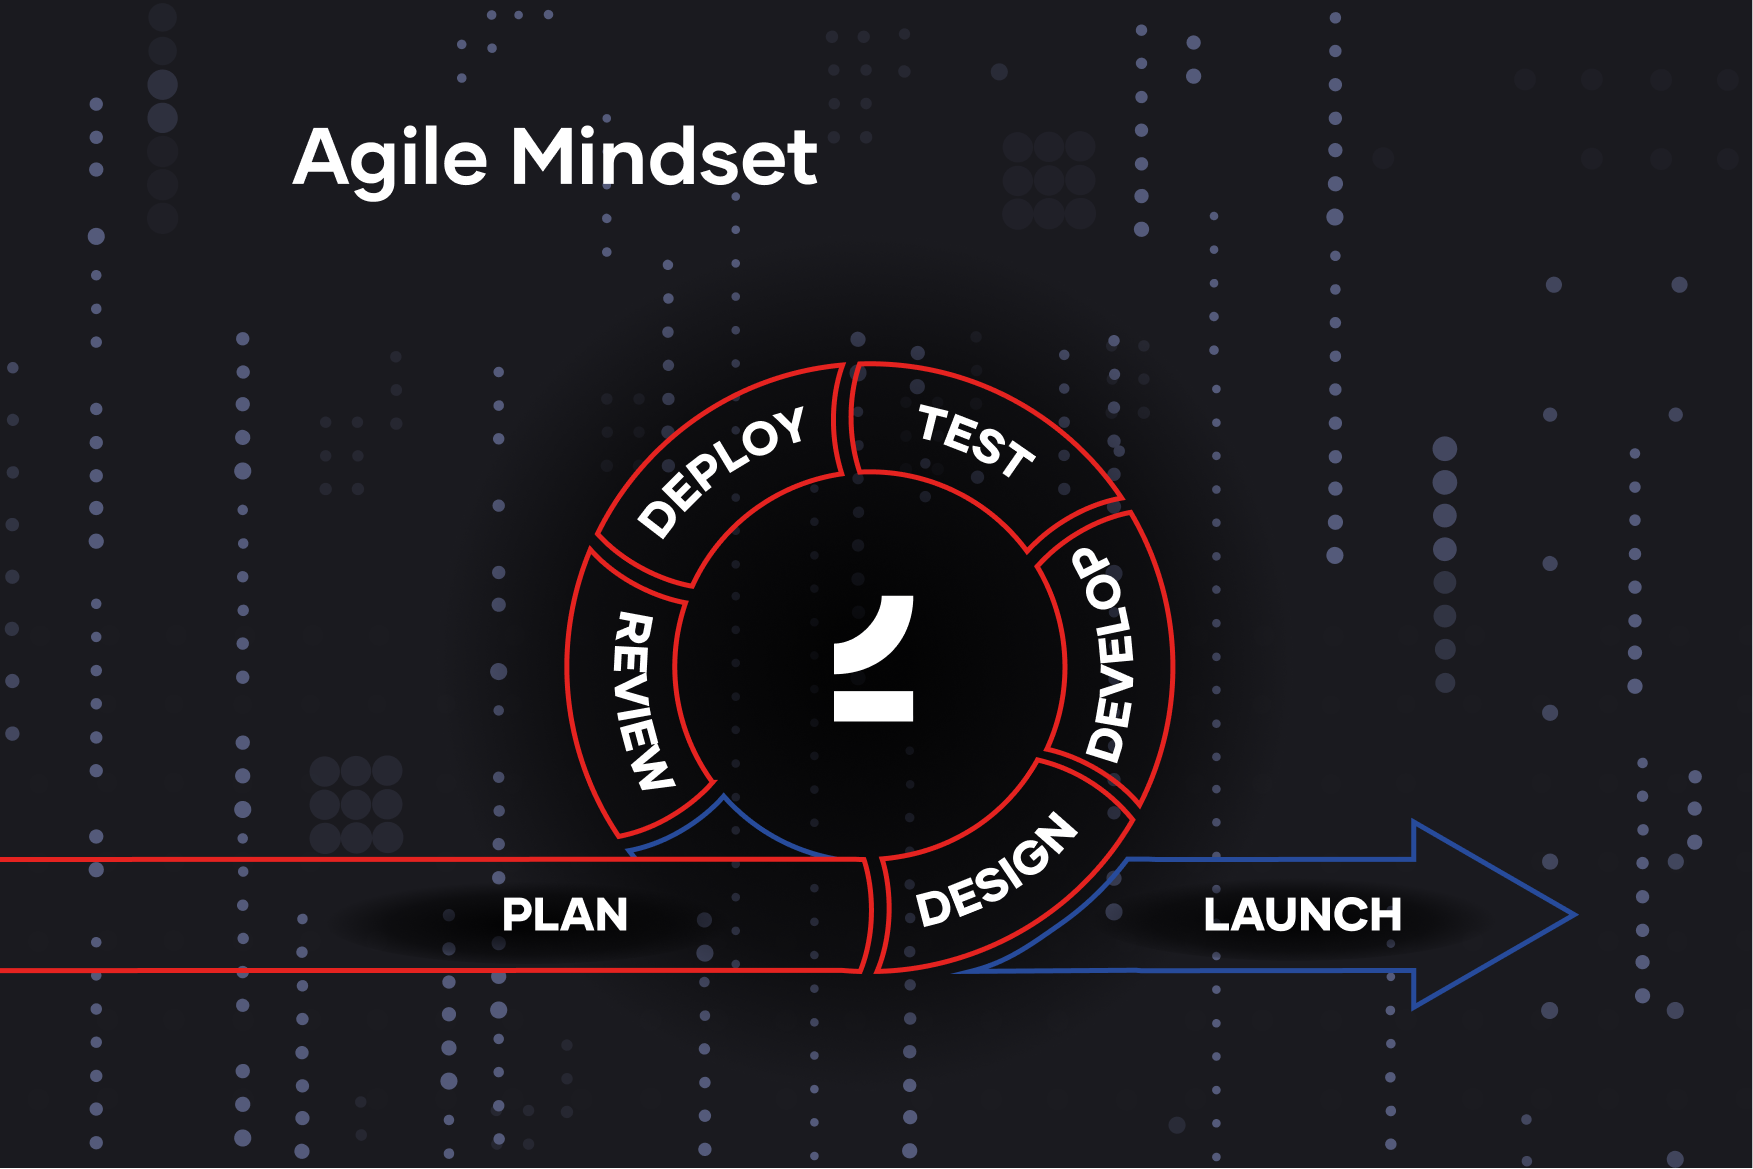 What is the Agile Mindset?